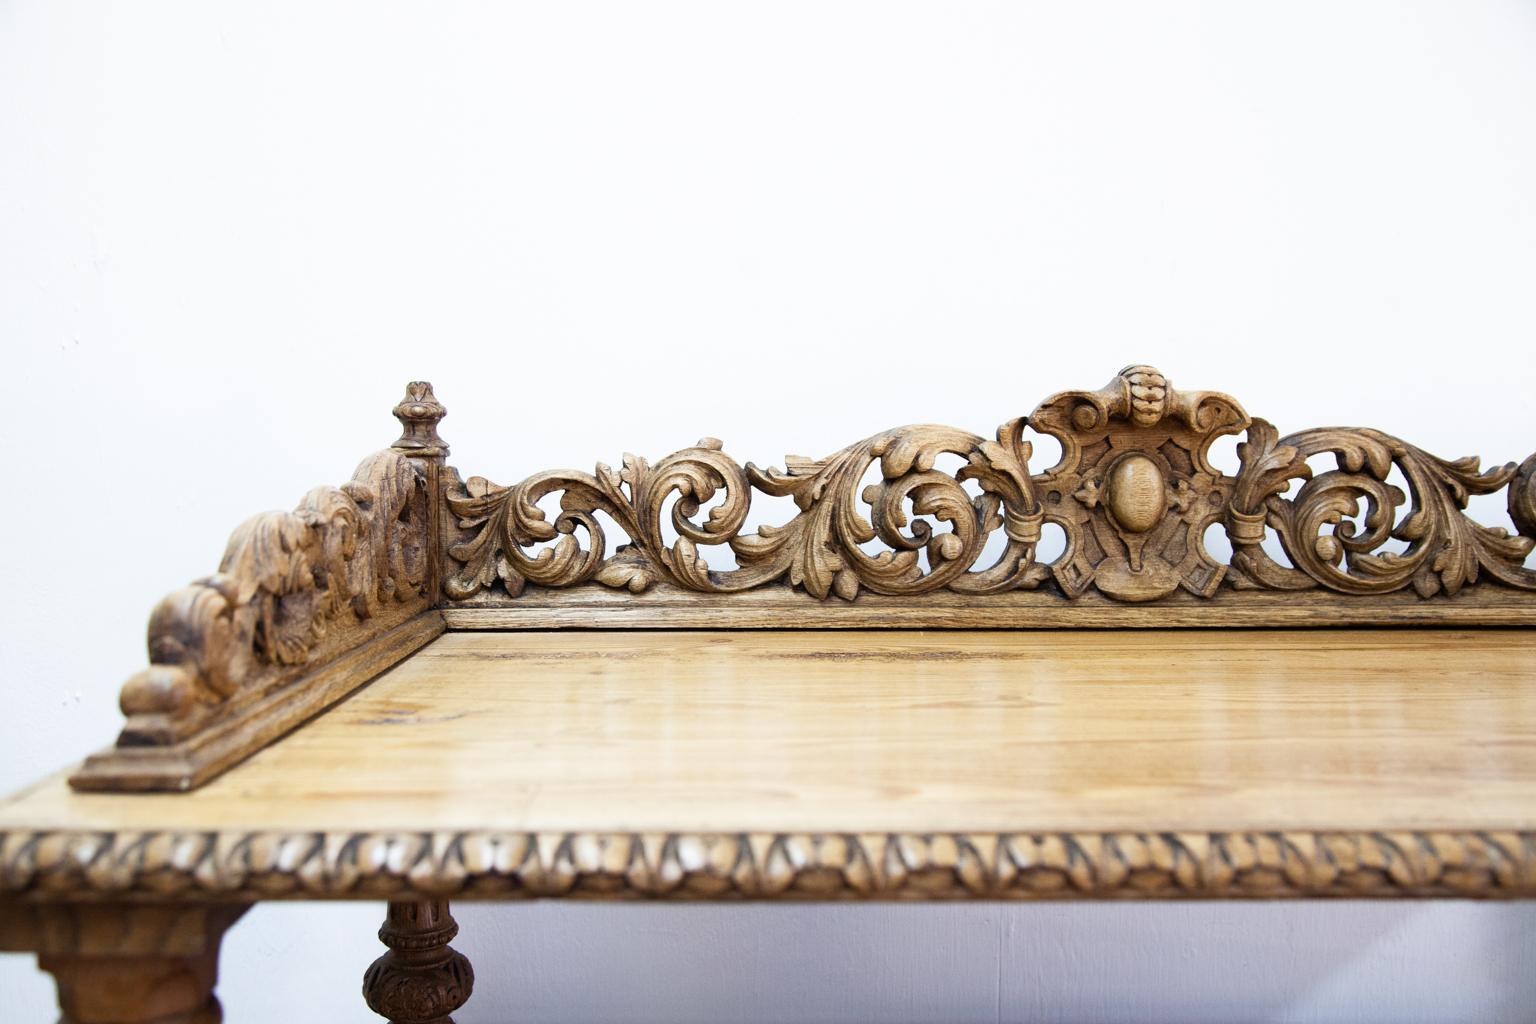 19th century carved English four-tier shelf, made of pine and oak, with reticulated carved gallery, moldings and connecting columns, on brass castors.